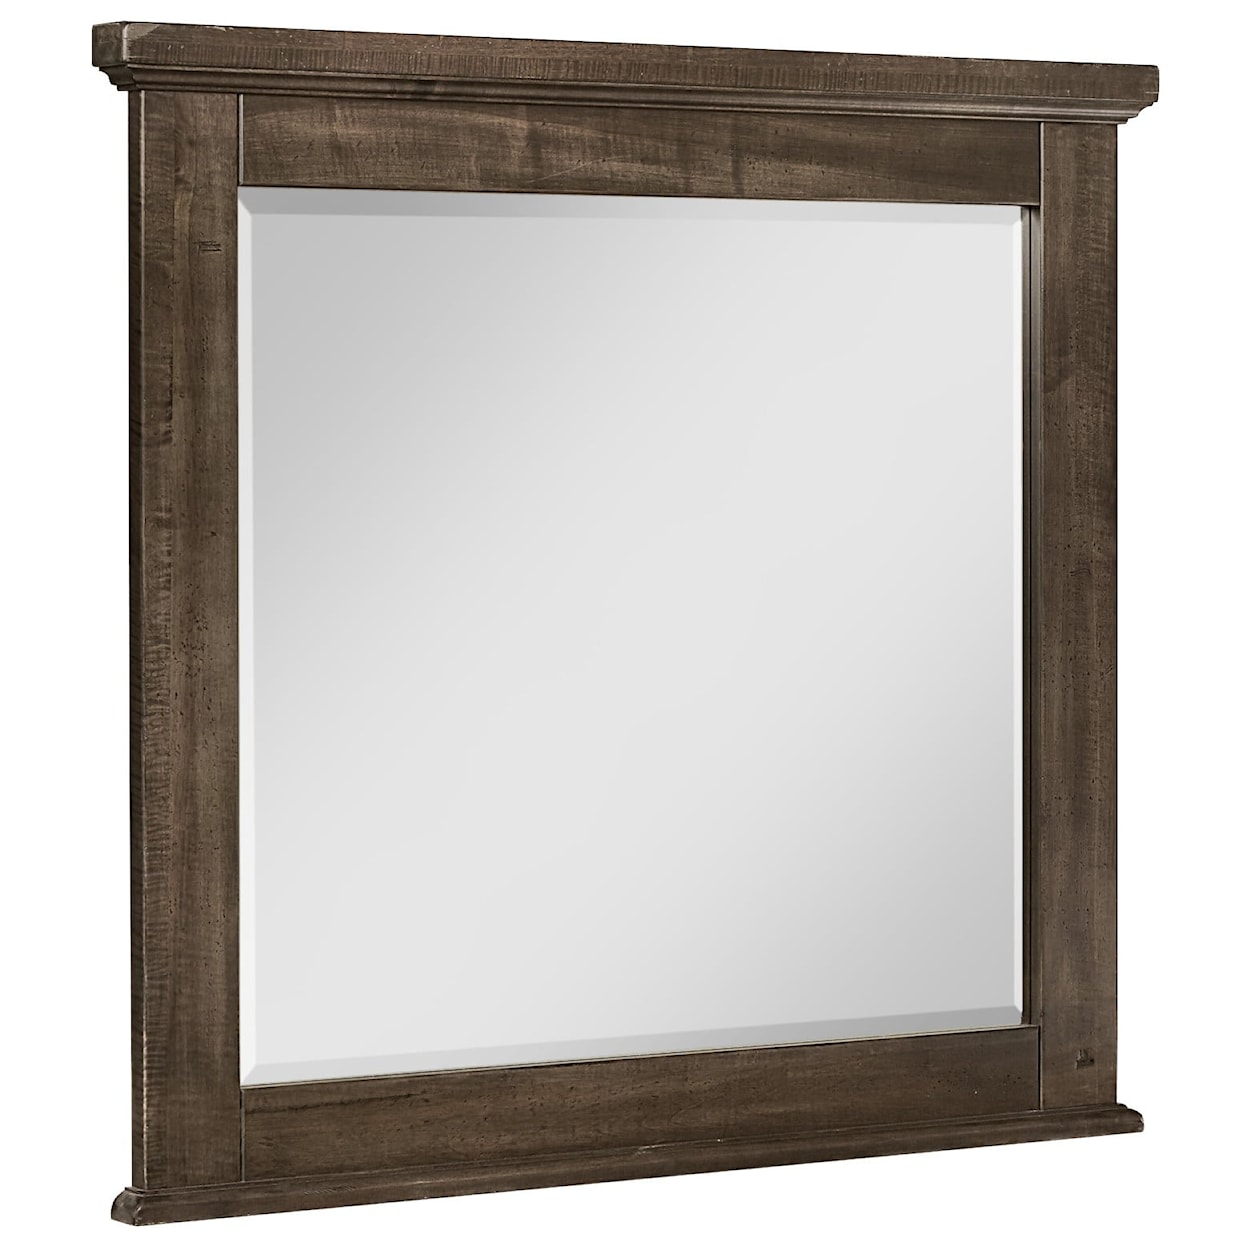 Vaughan Bassett Cool Rustic Landscape Mirror with Beveled Glass